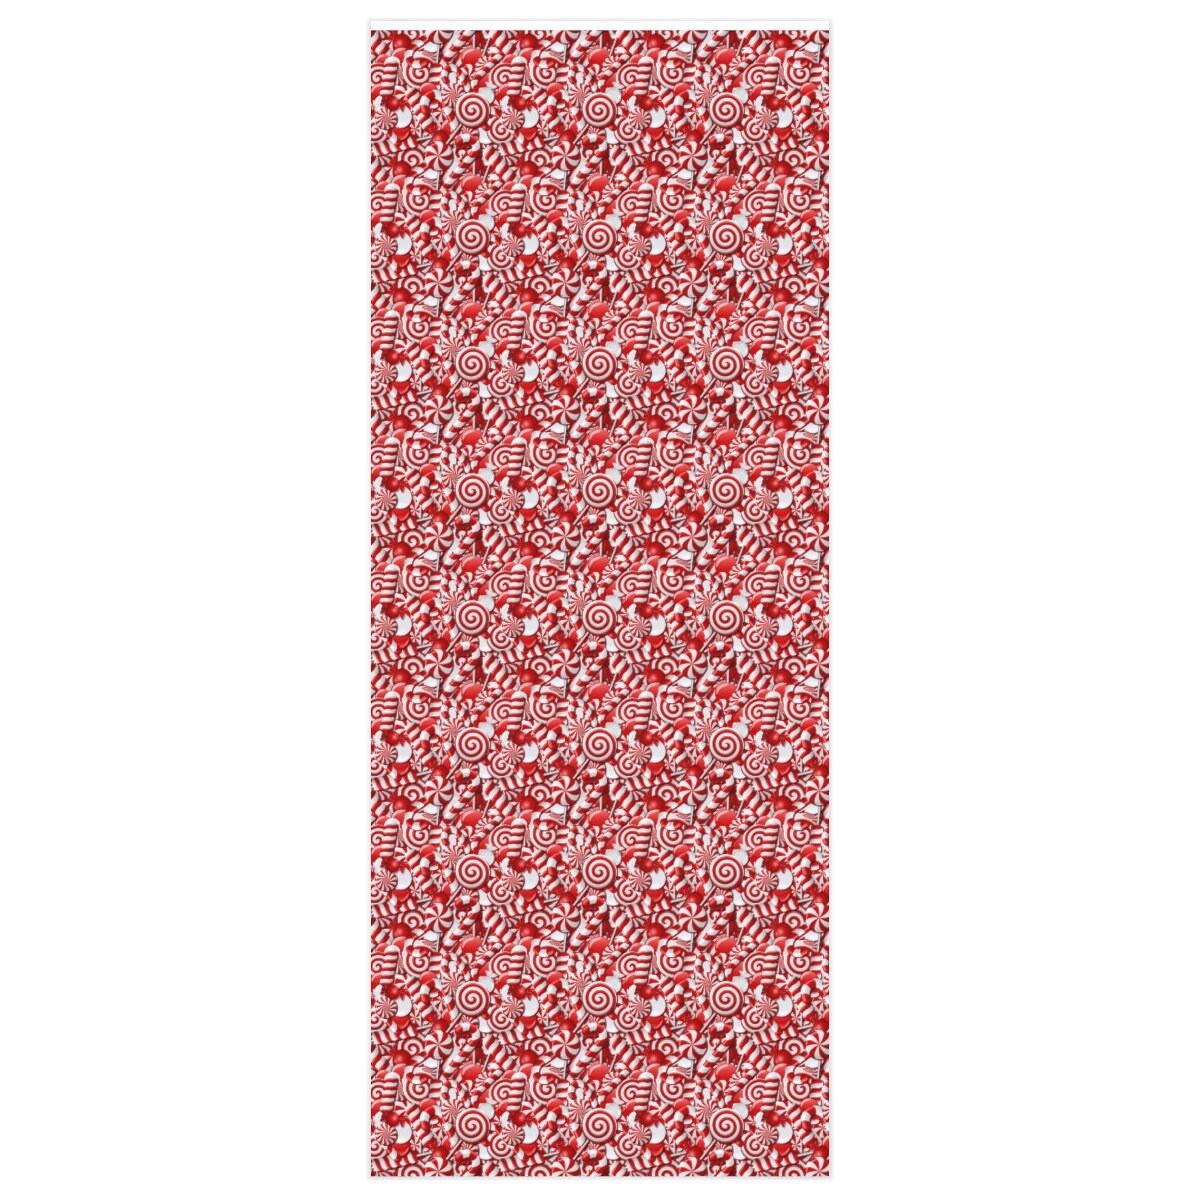 Red and White Peppermint Strip Holiday Christmas Gift Premium Wrapping  Paper 15ft